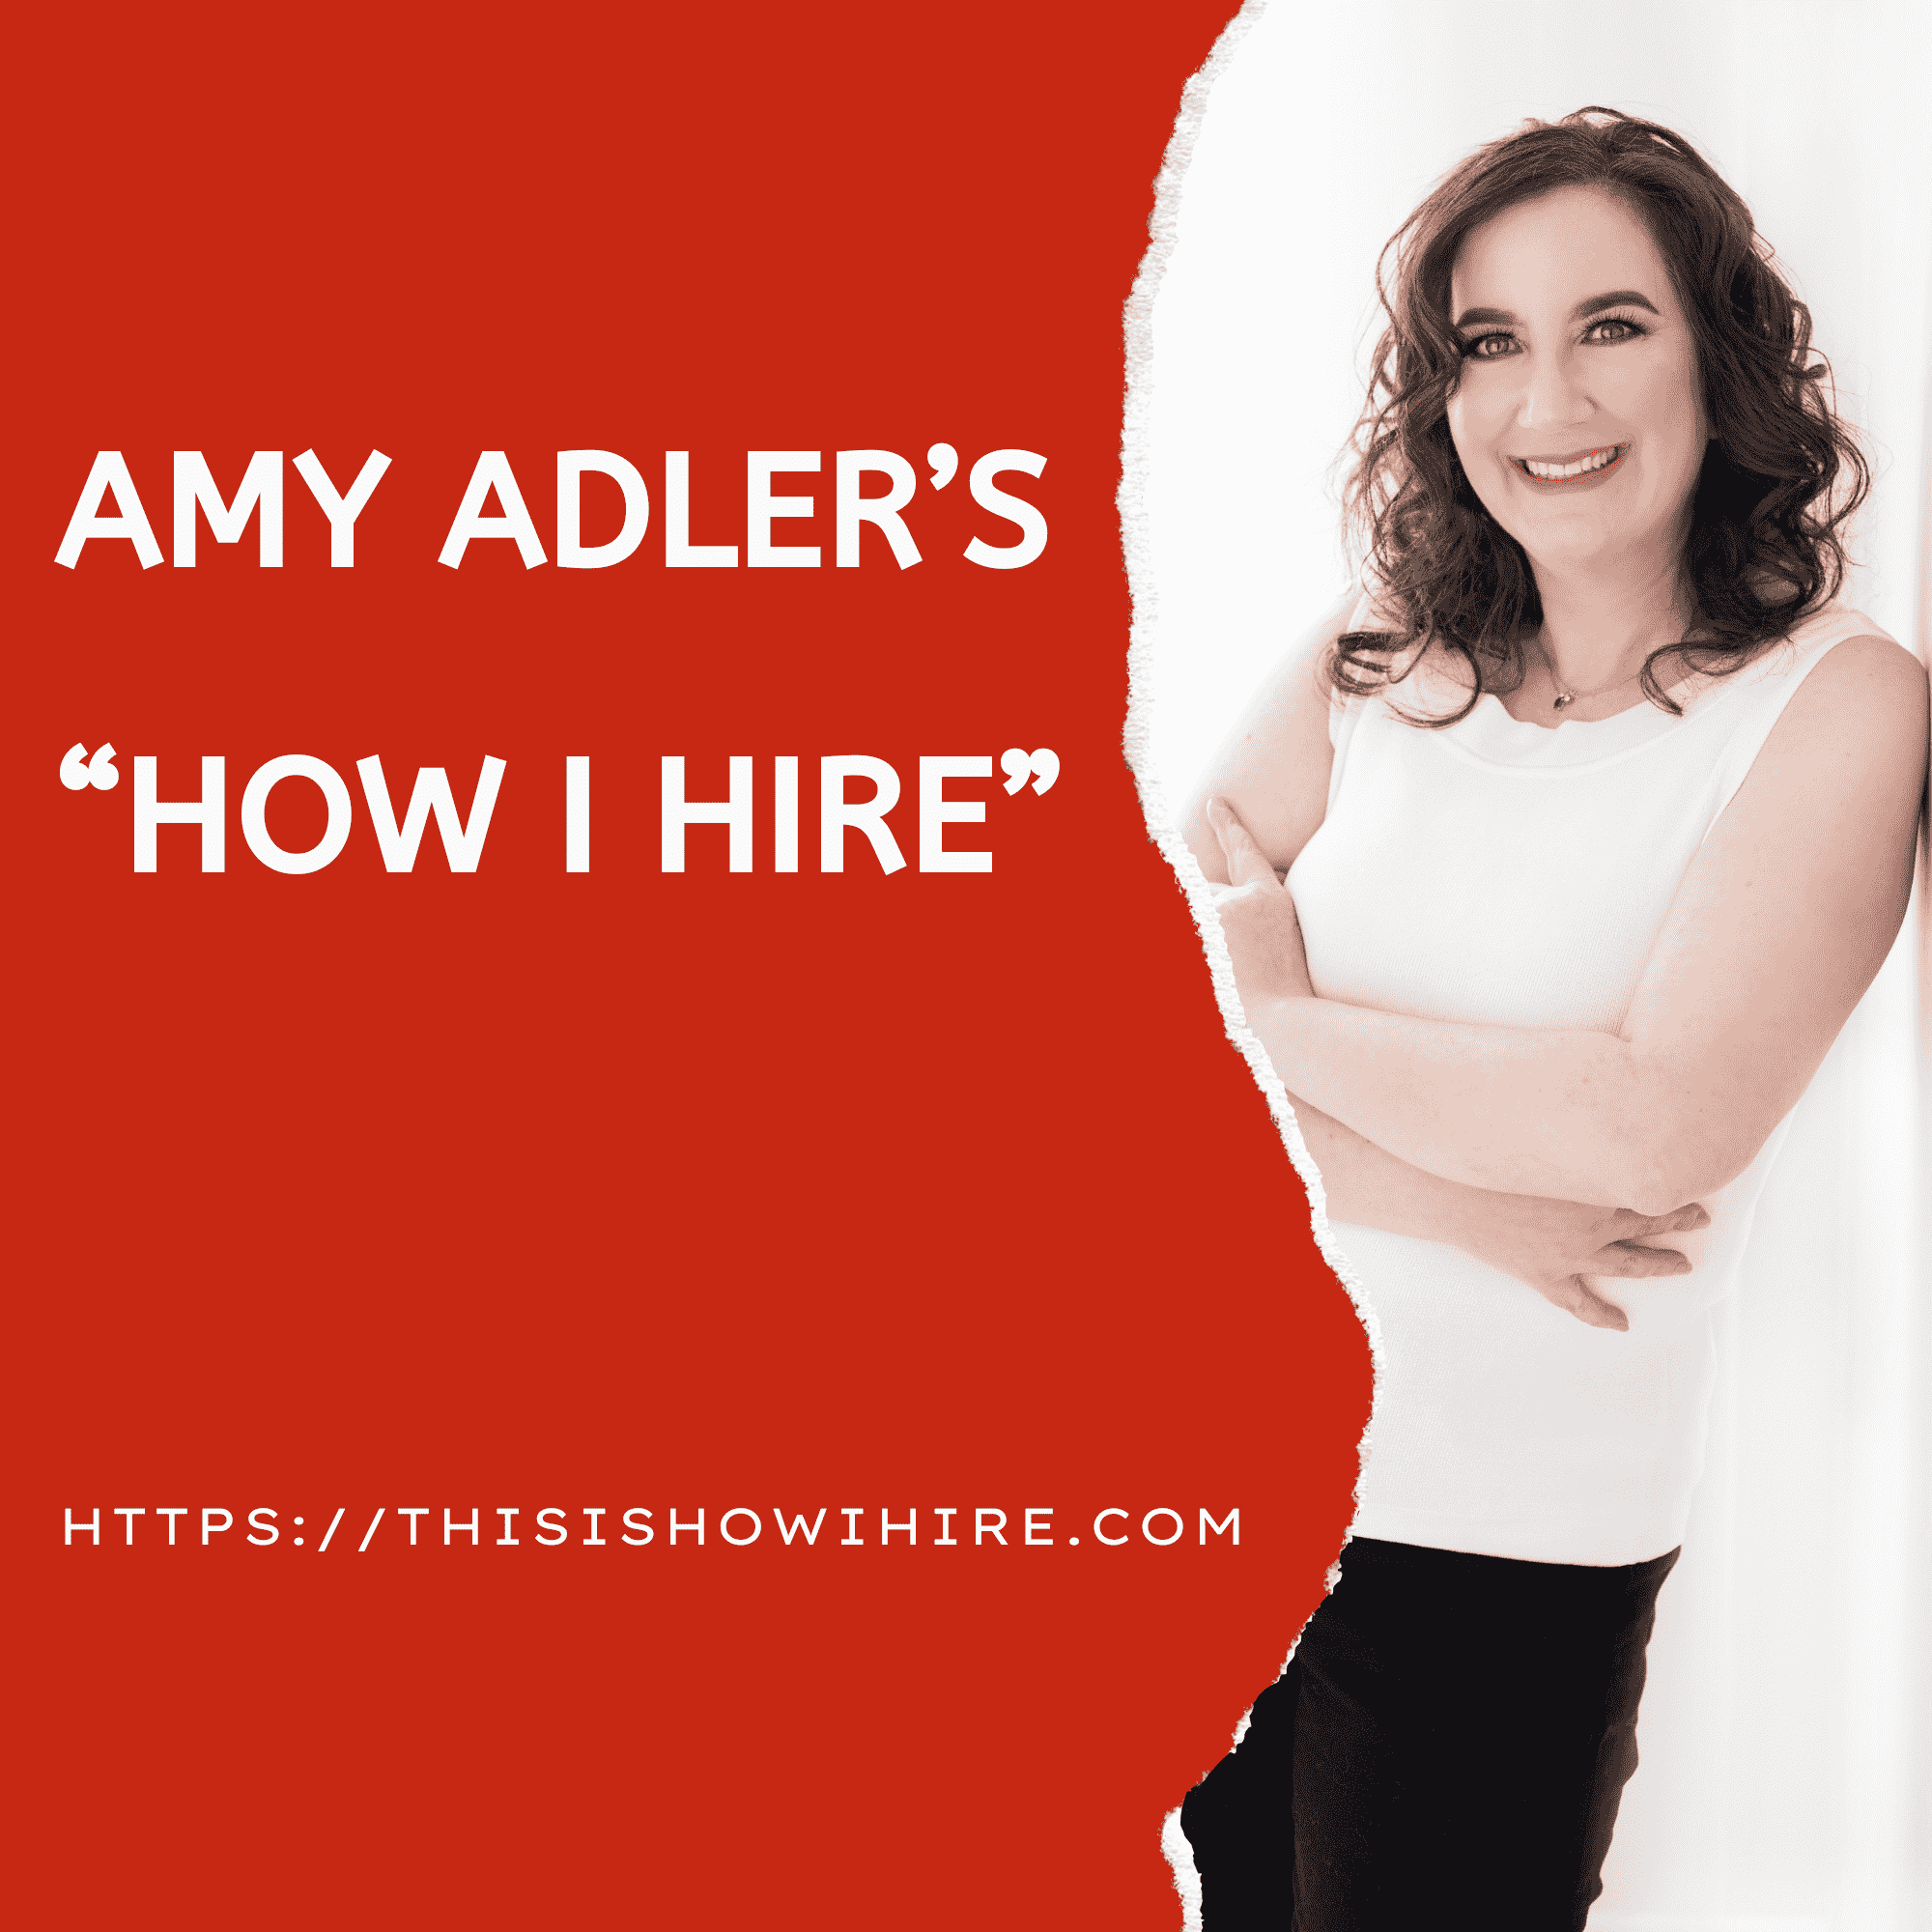 John Gates: Salary Coach and Talent Acquisition Leader | Amy Adler's "How I Hire"